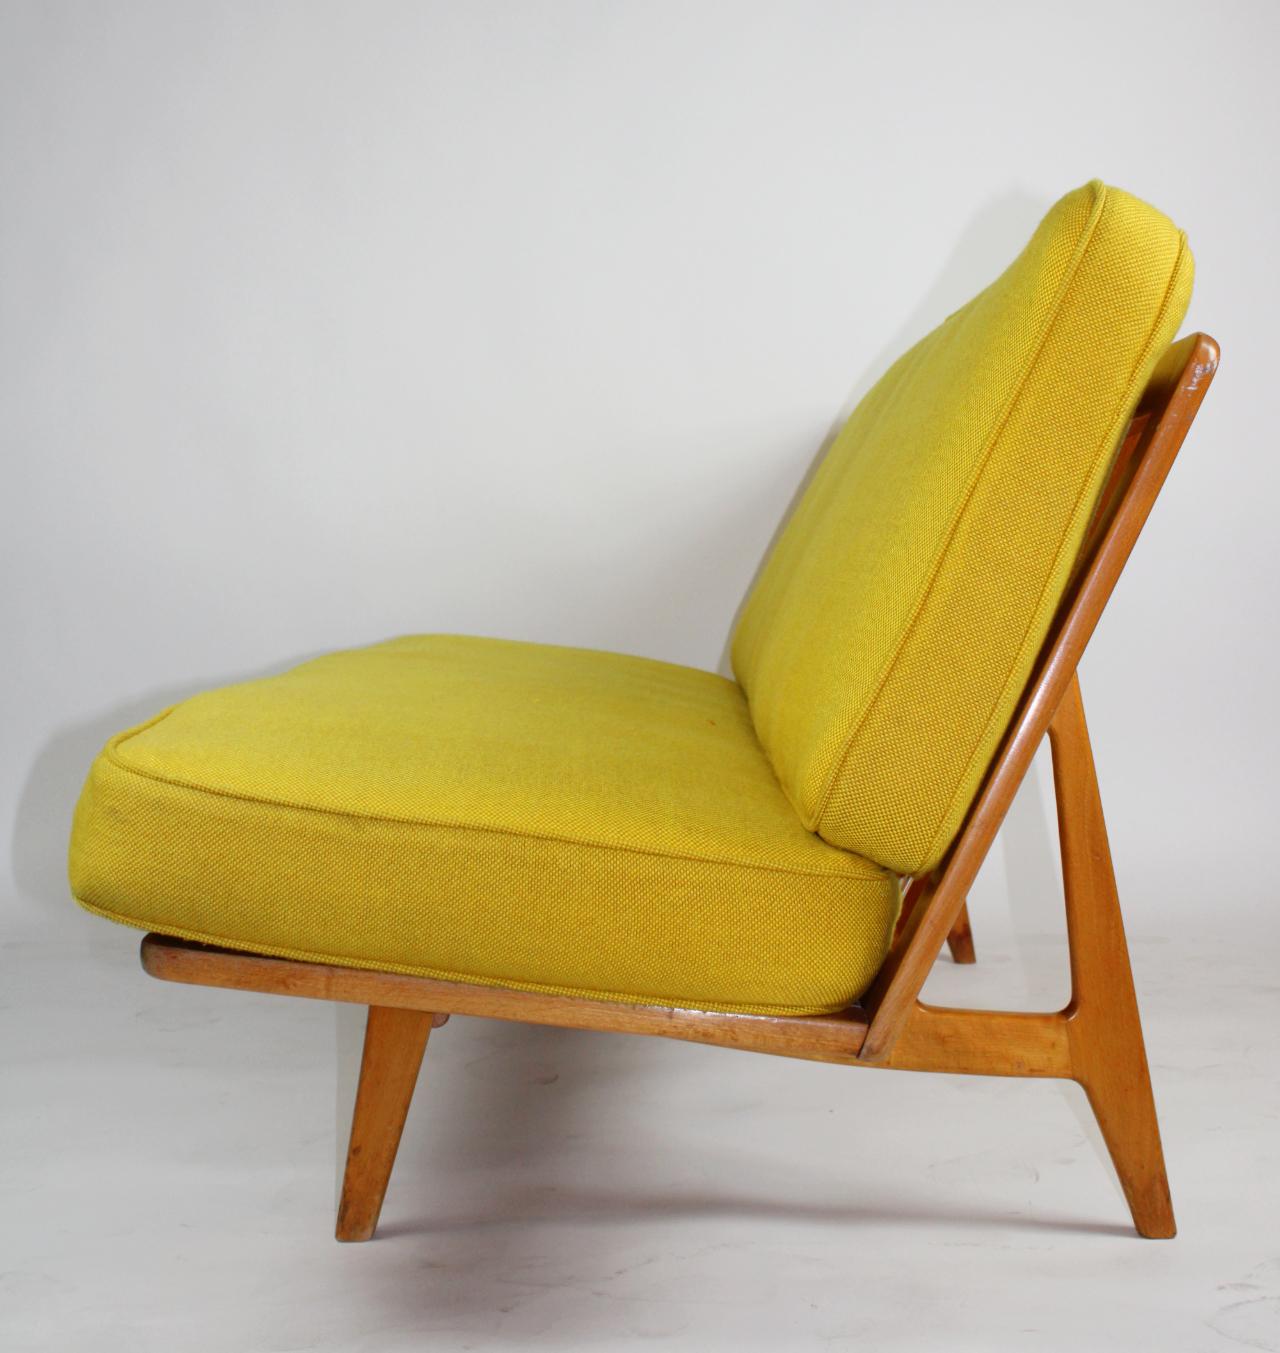 Mid Century slipper sofa by Peter Hvidt & Orla Mølgaard-Nielsen for France & Daverkosen of Denmark.
Companion piece to the FD 172 slipper chairs, this sofa is a rare find.
Versatile modular design. Ideal placement in central area of a room.
Original